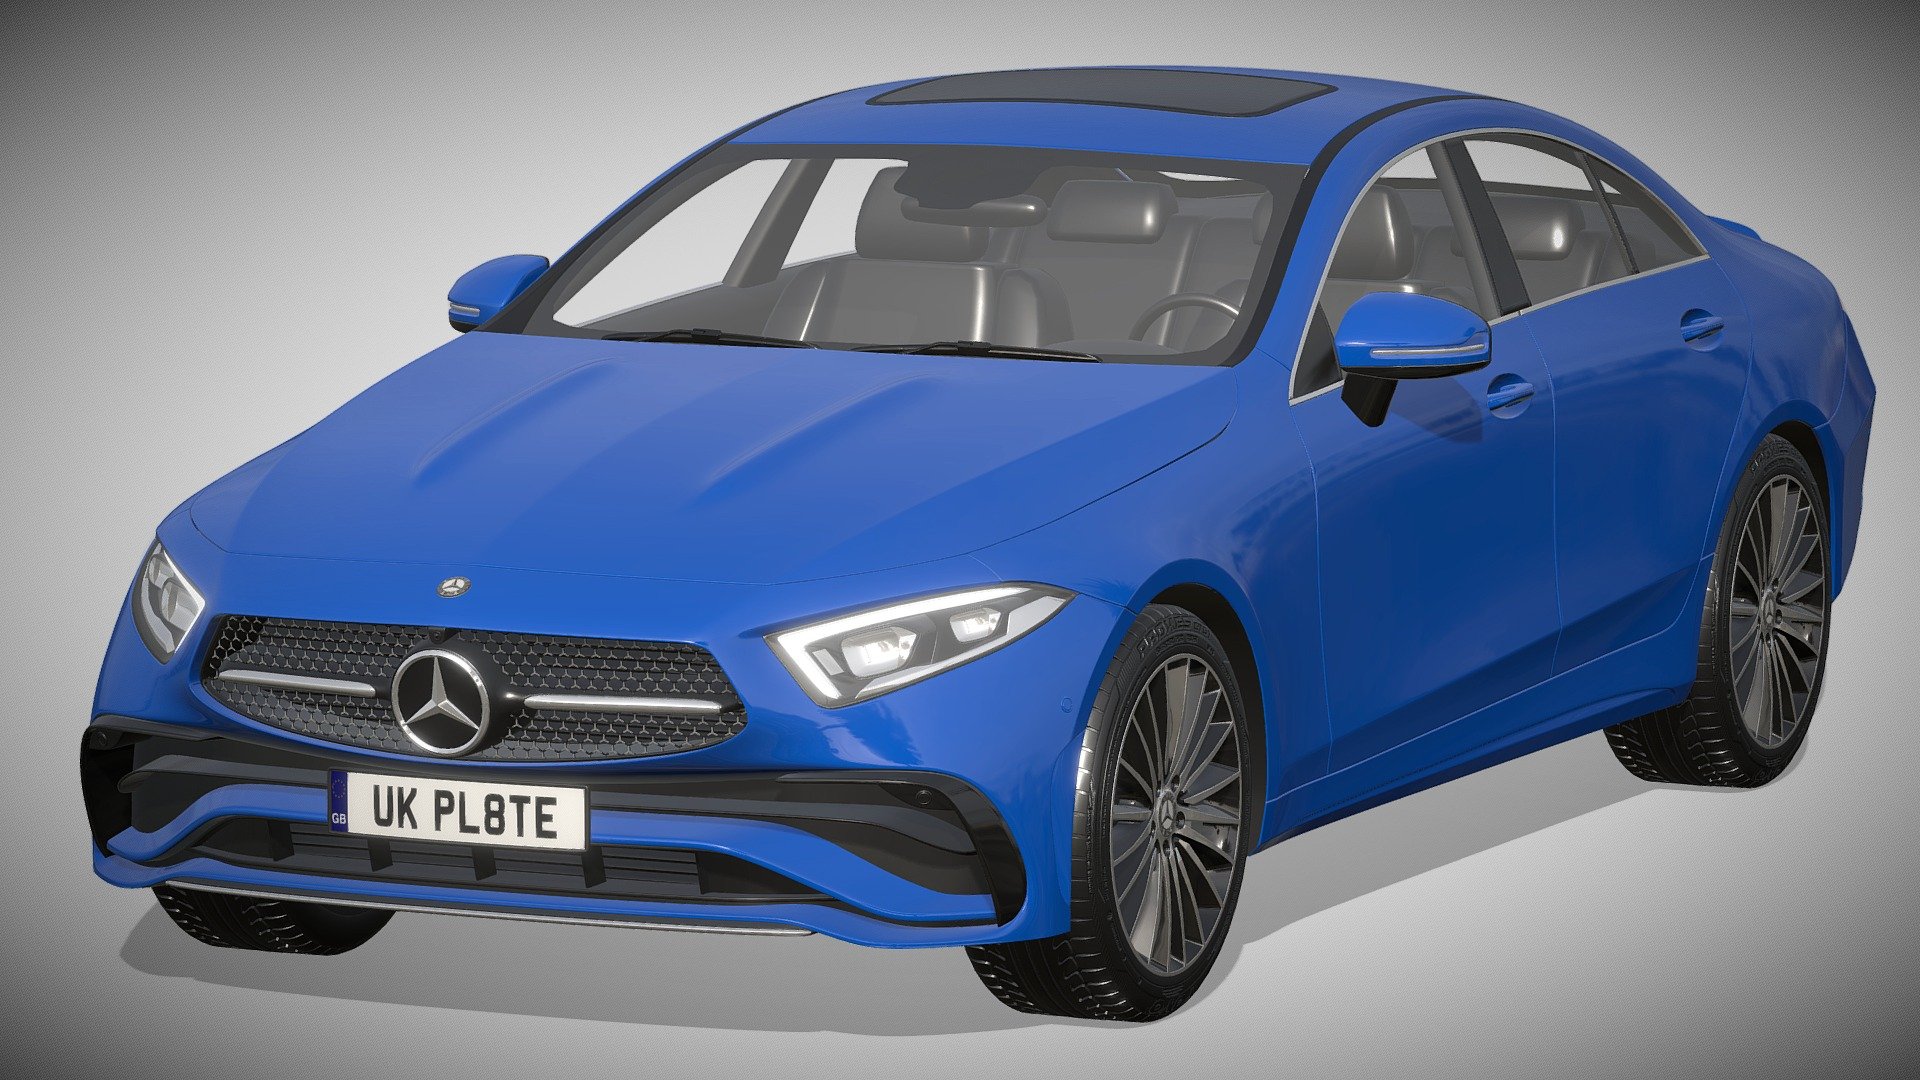 Mercedes-Benz CLS 2022

https://www.mercedes-benz.de/passengercars/mercedes-benz-cars/models/cls/coupe-c257-fl/explore.html

Clean geometry Light weight model, yet completely detailed for HI-Res renders. Use for movies, Advertisements or games

Corona render and materials

All textures include in *.rar files

Lighting setup is not included in the file! - Mercedes-Benz CLS 2022 - Buy Royalty Free 3D model by zifir3d 3d model